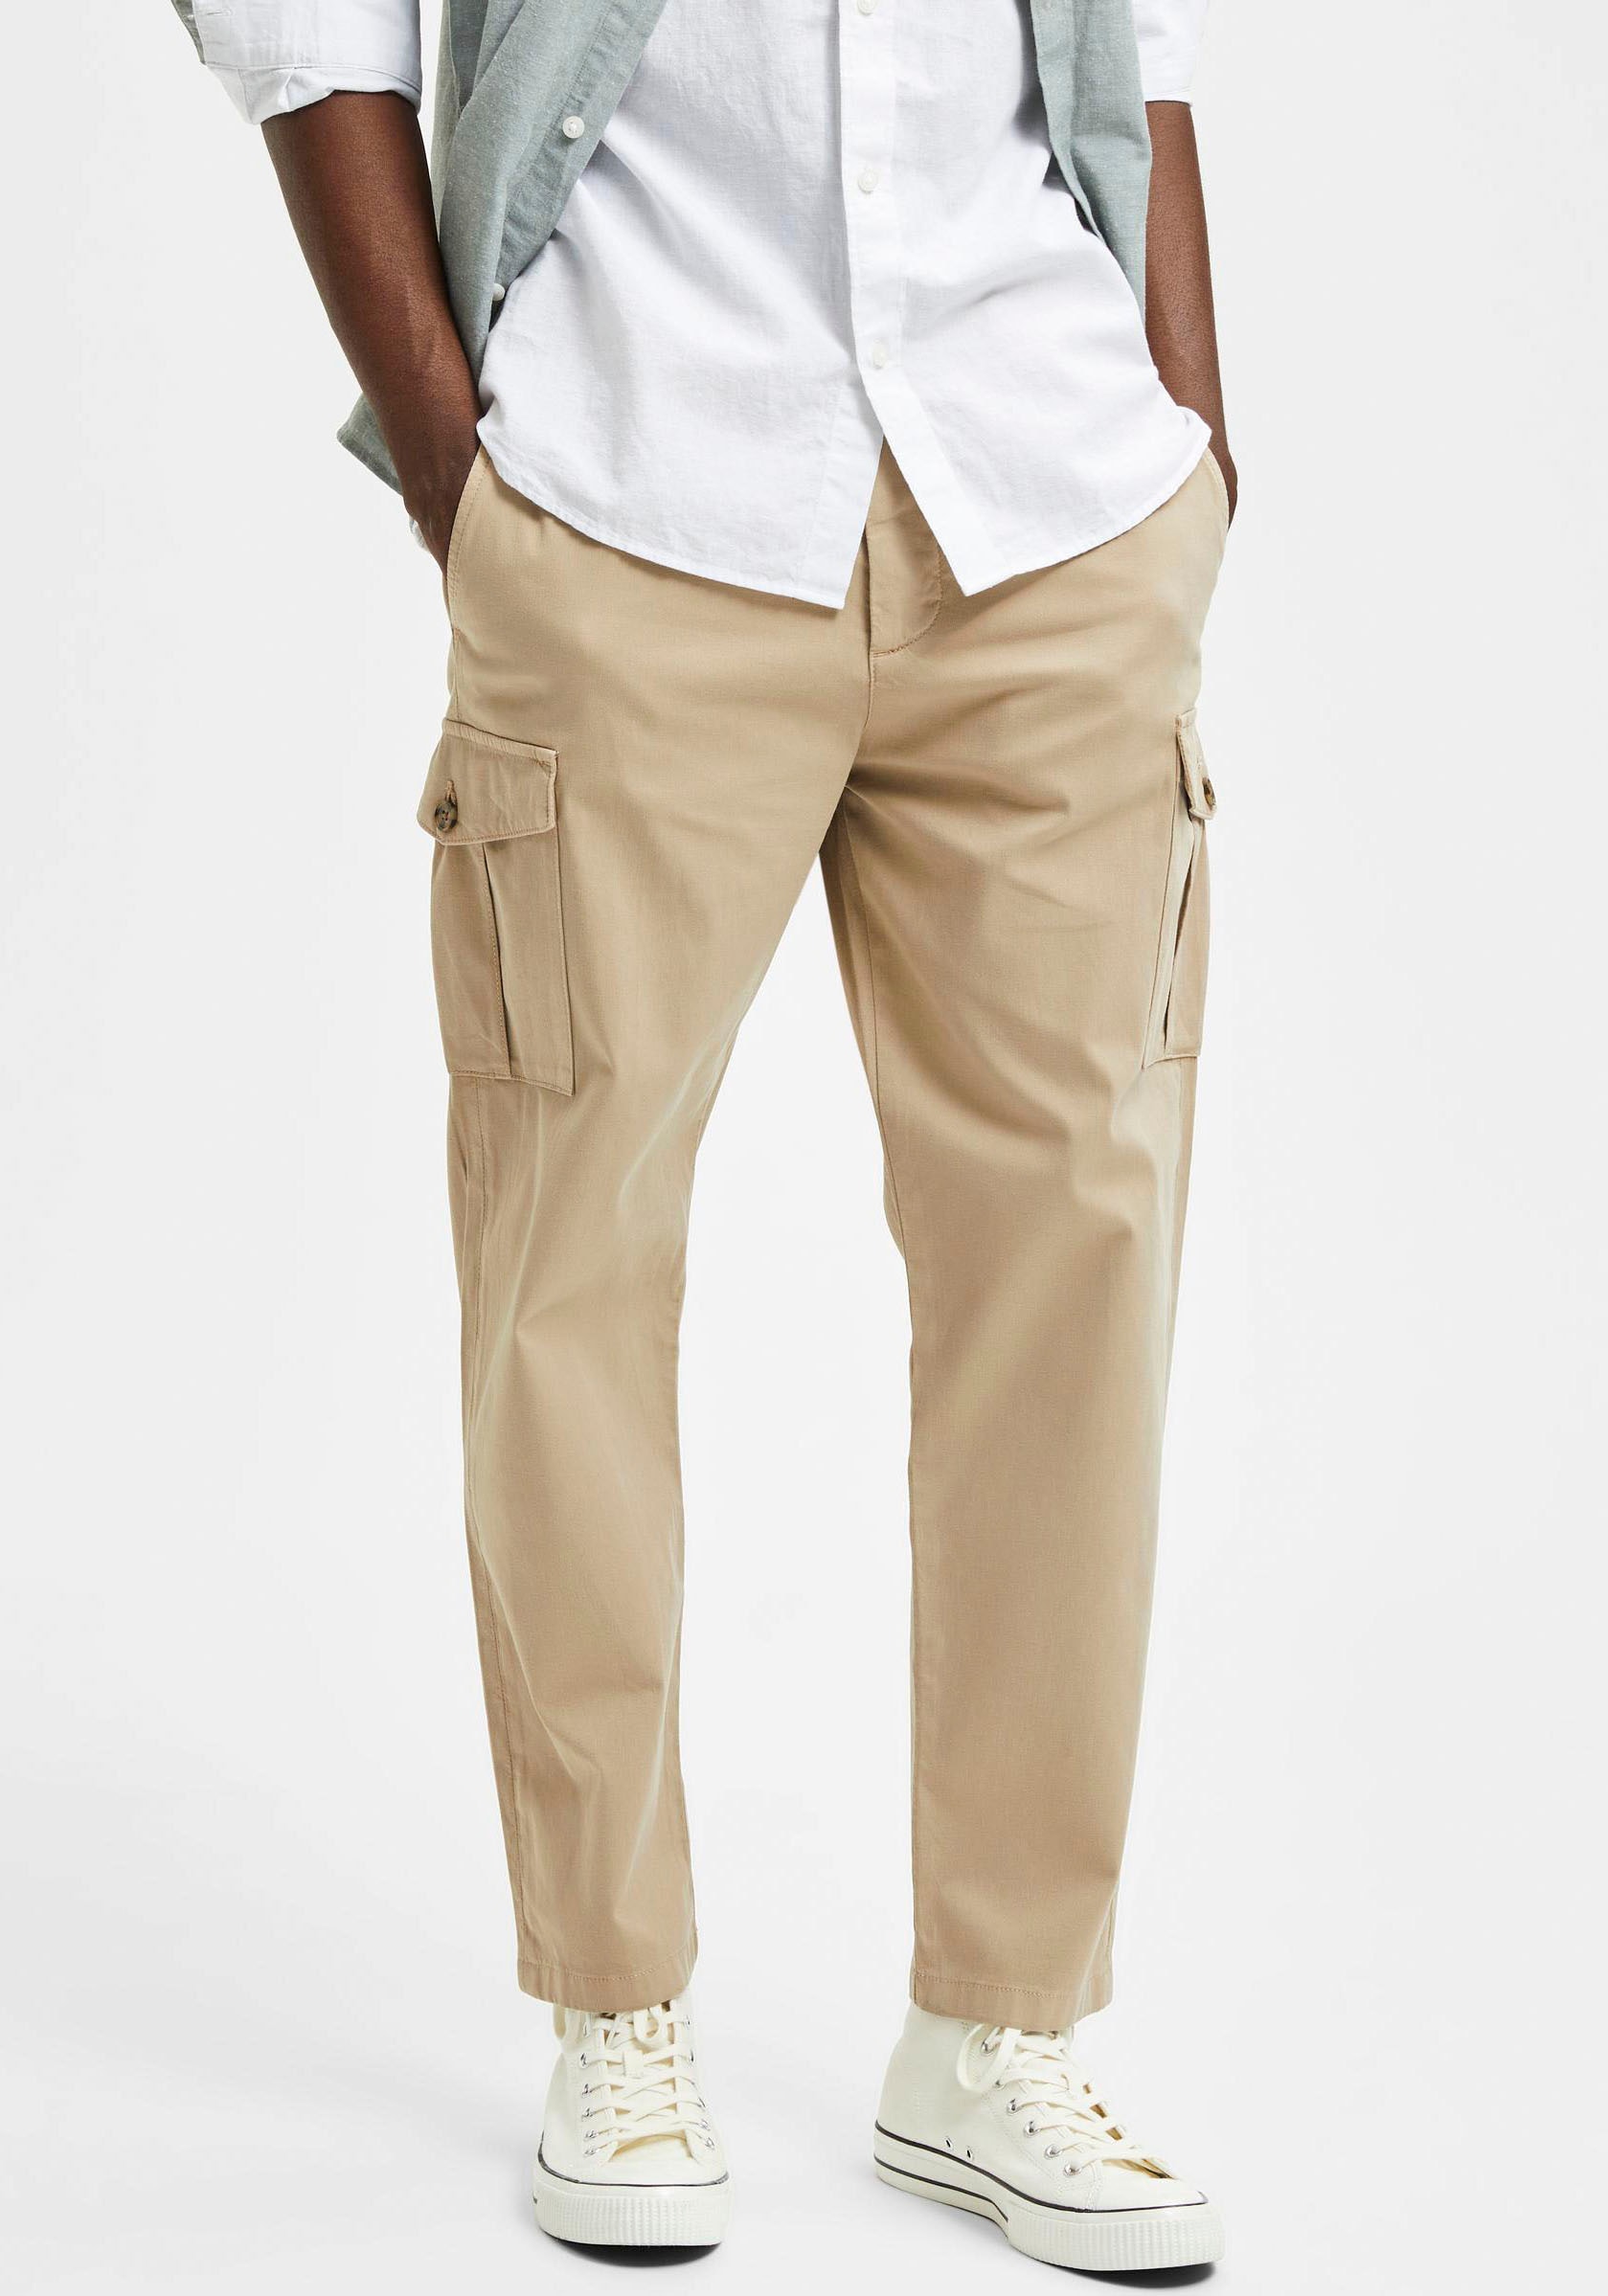 OTTO Cargohose online »WICK SELECTED HOMME bei PANT« CARGO kaufen